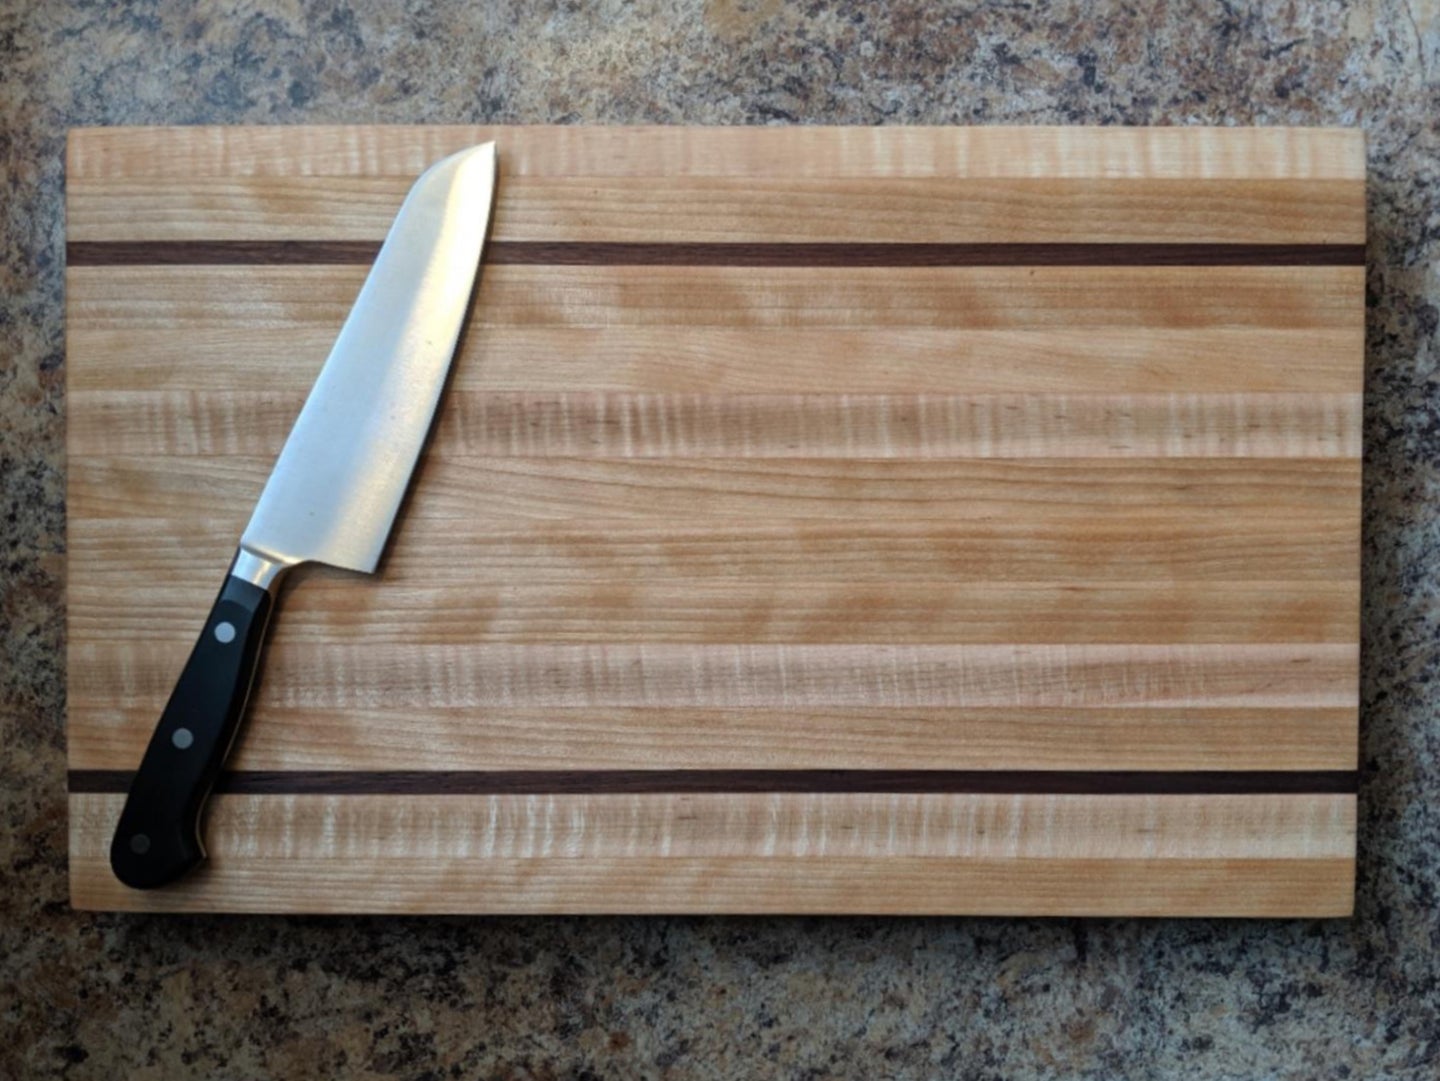 A DIY cutting board with accent borders made out of a different type of wood than the rest of the piece.